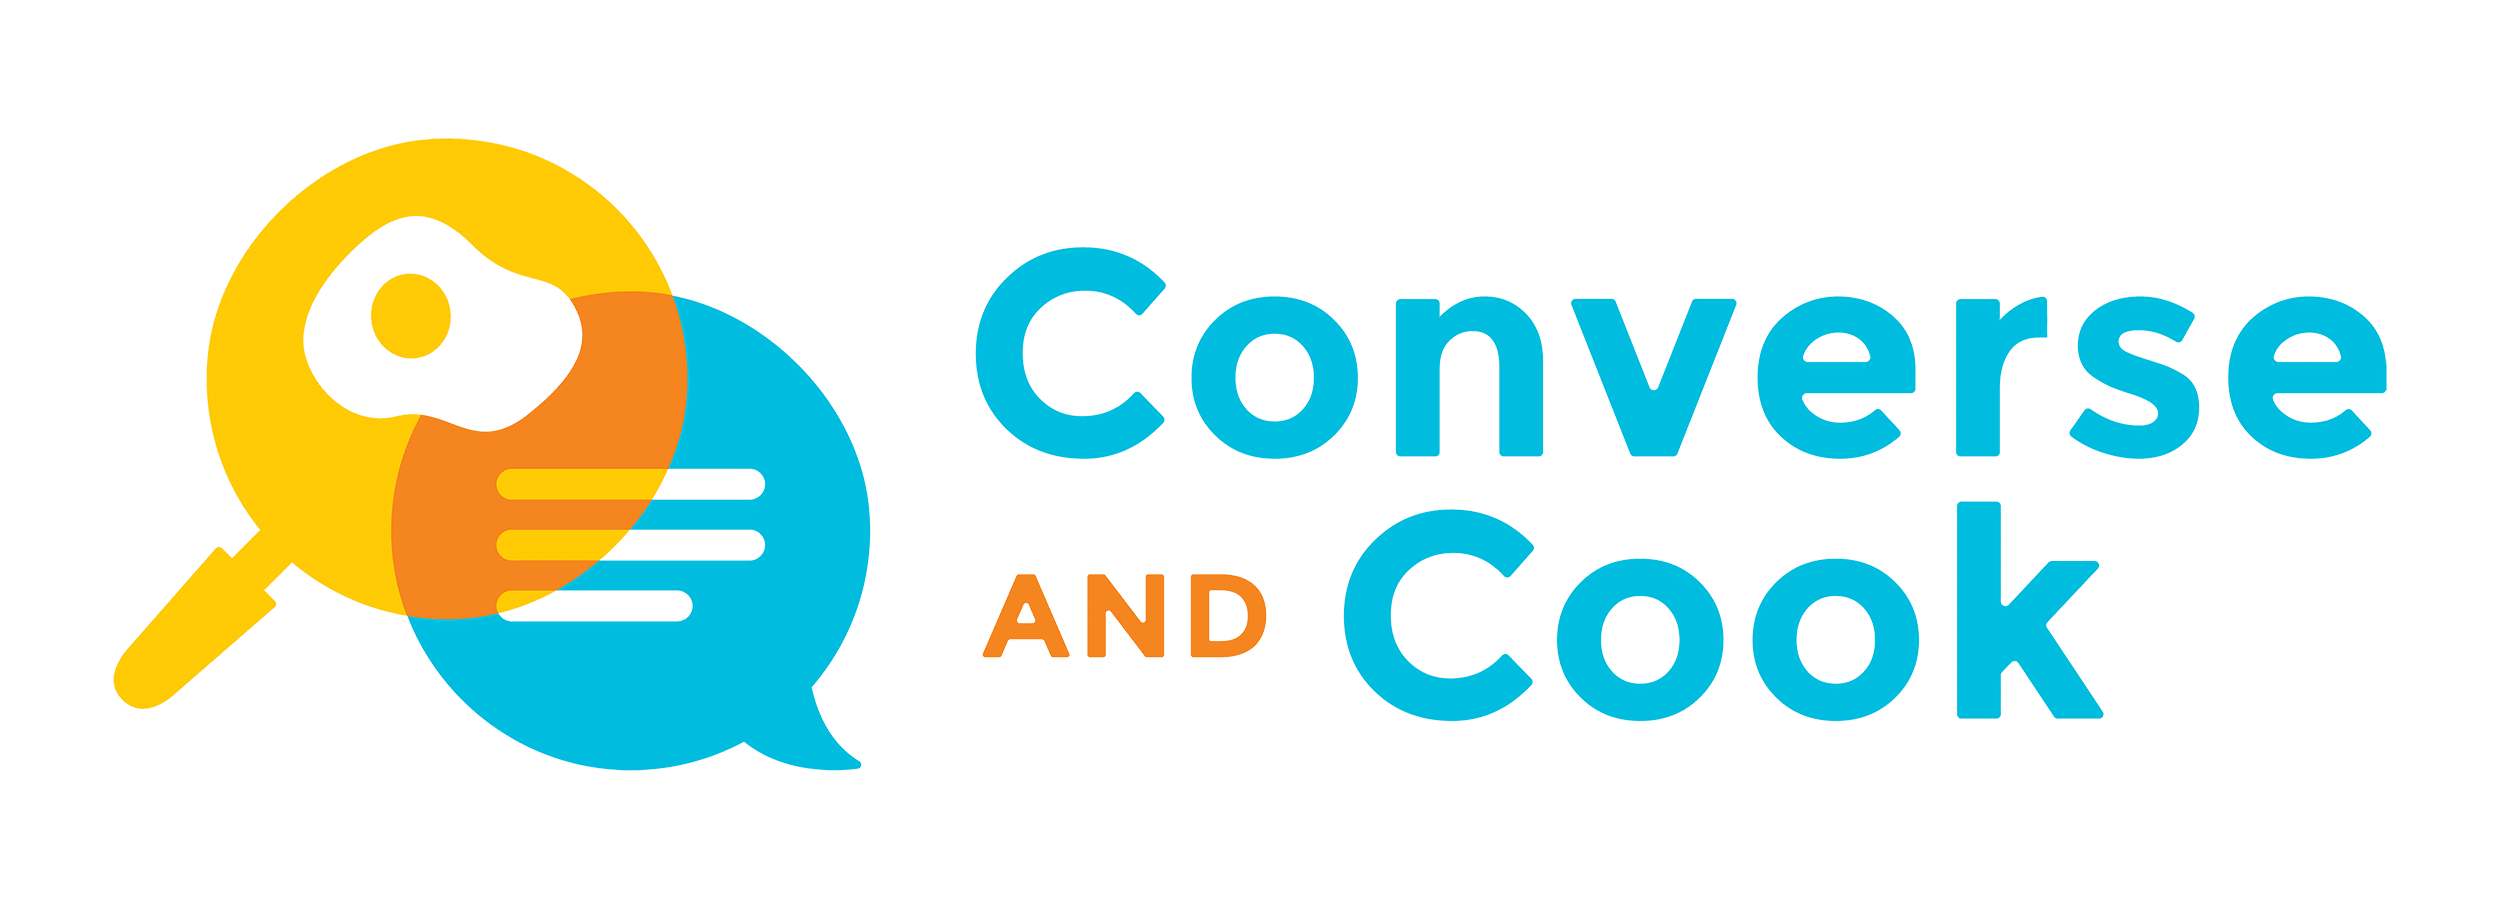 Converse and Cook Logo